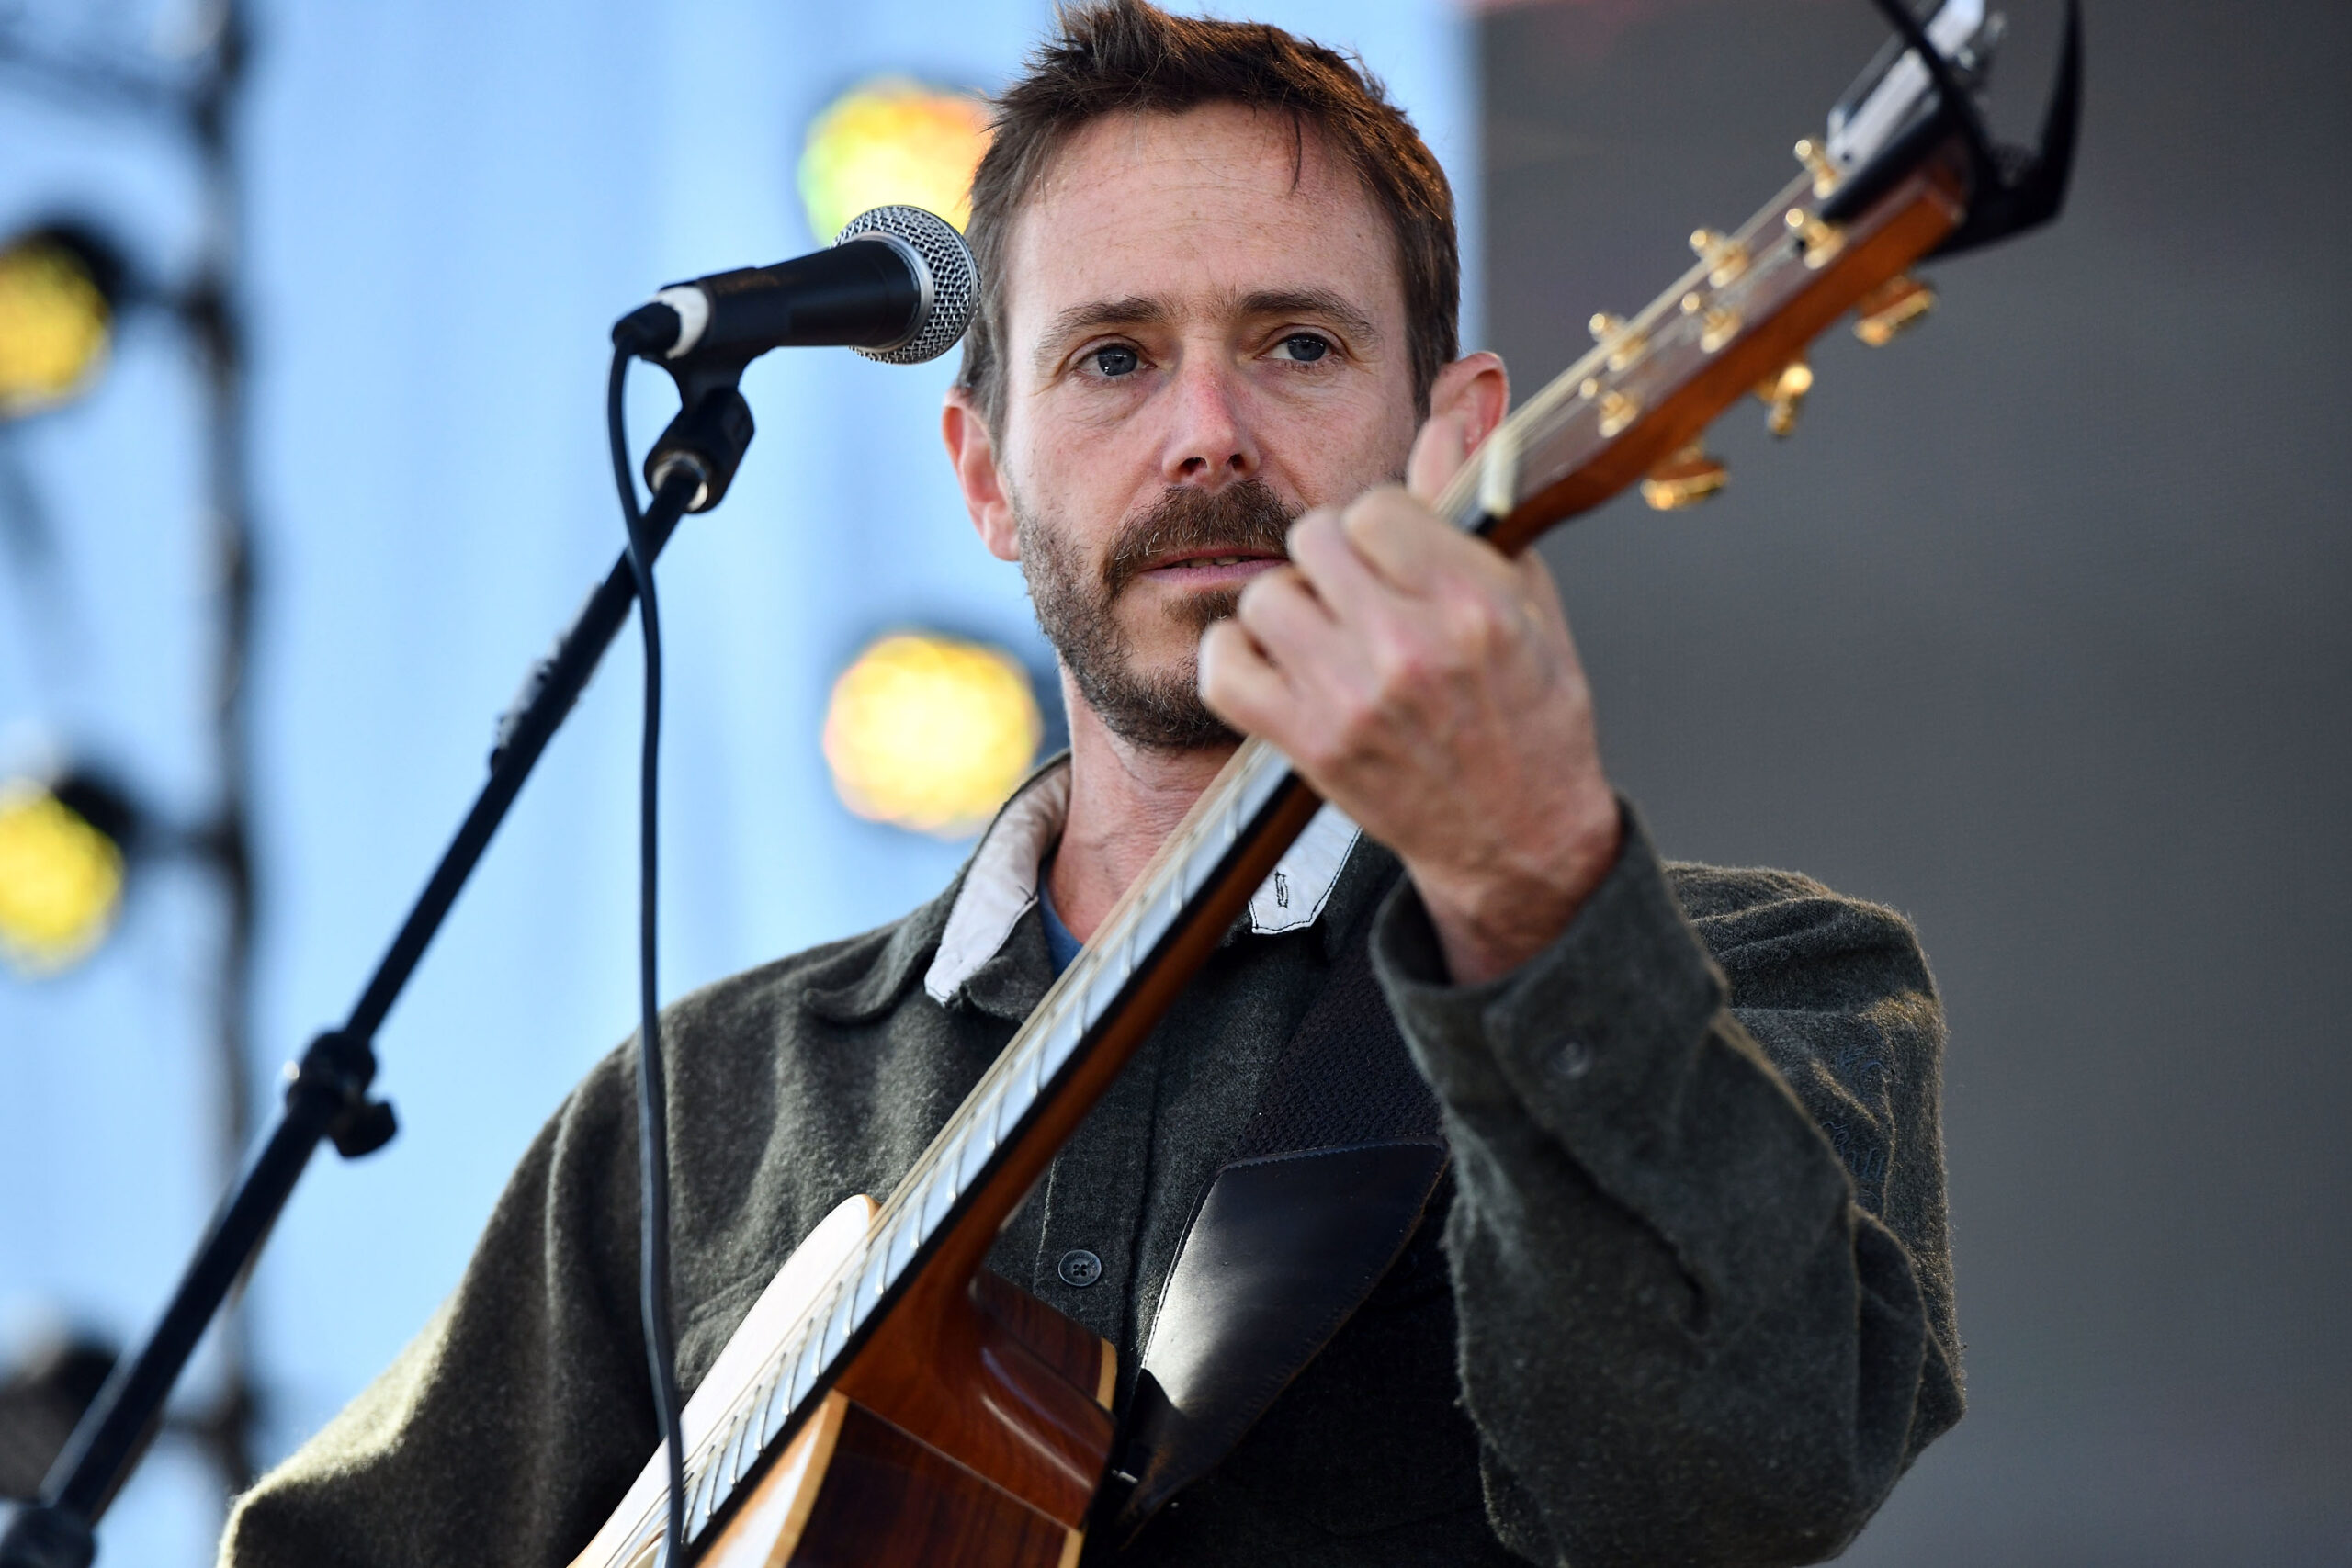 5 Albums I Can’t Live Without: Glen Phillips of Toad the Wet Sprocket